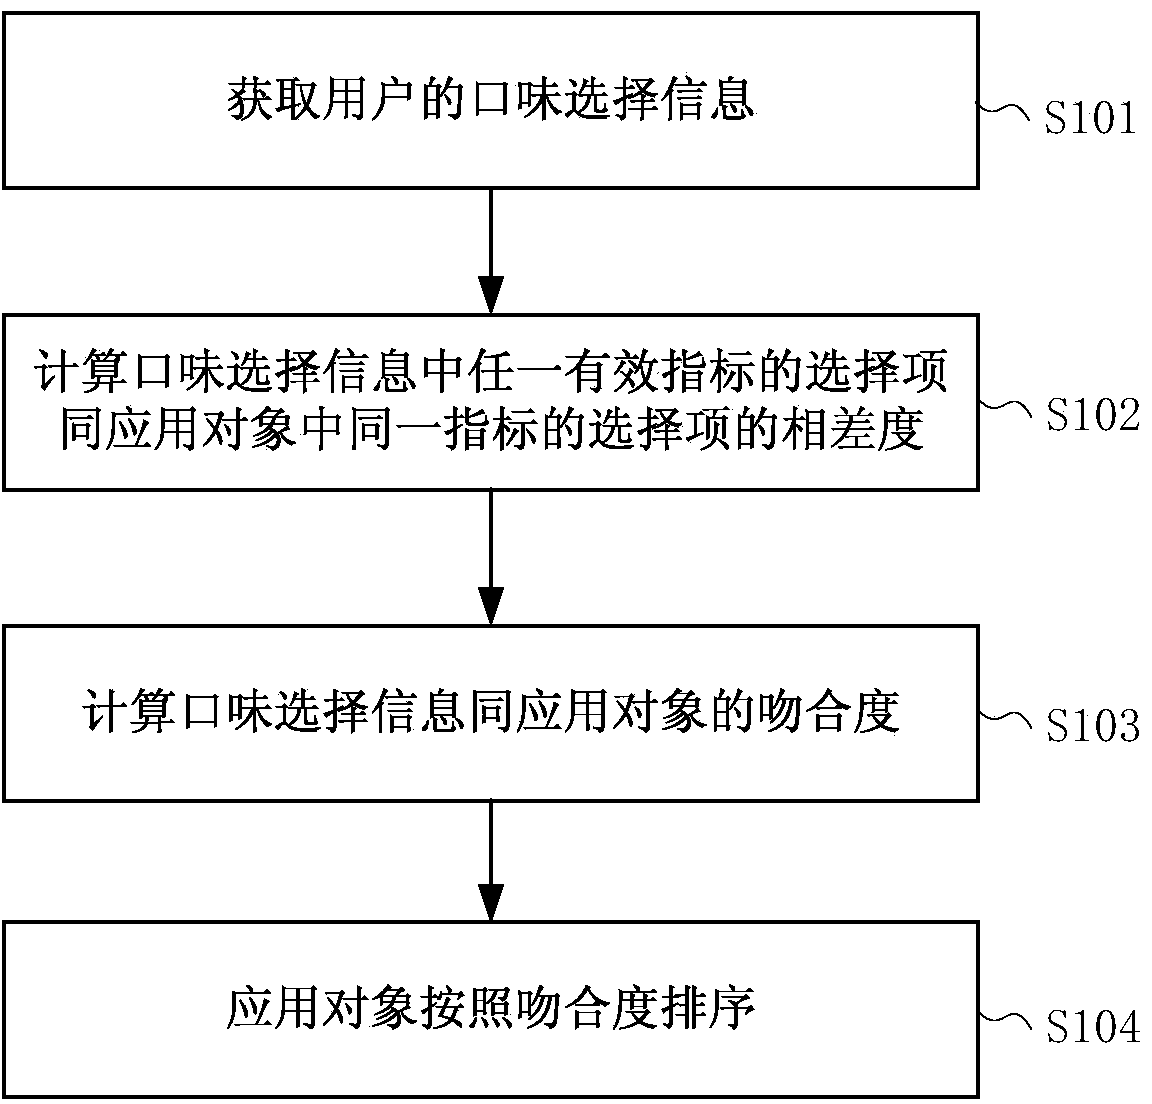 Method for matching taste selection information with application objects